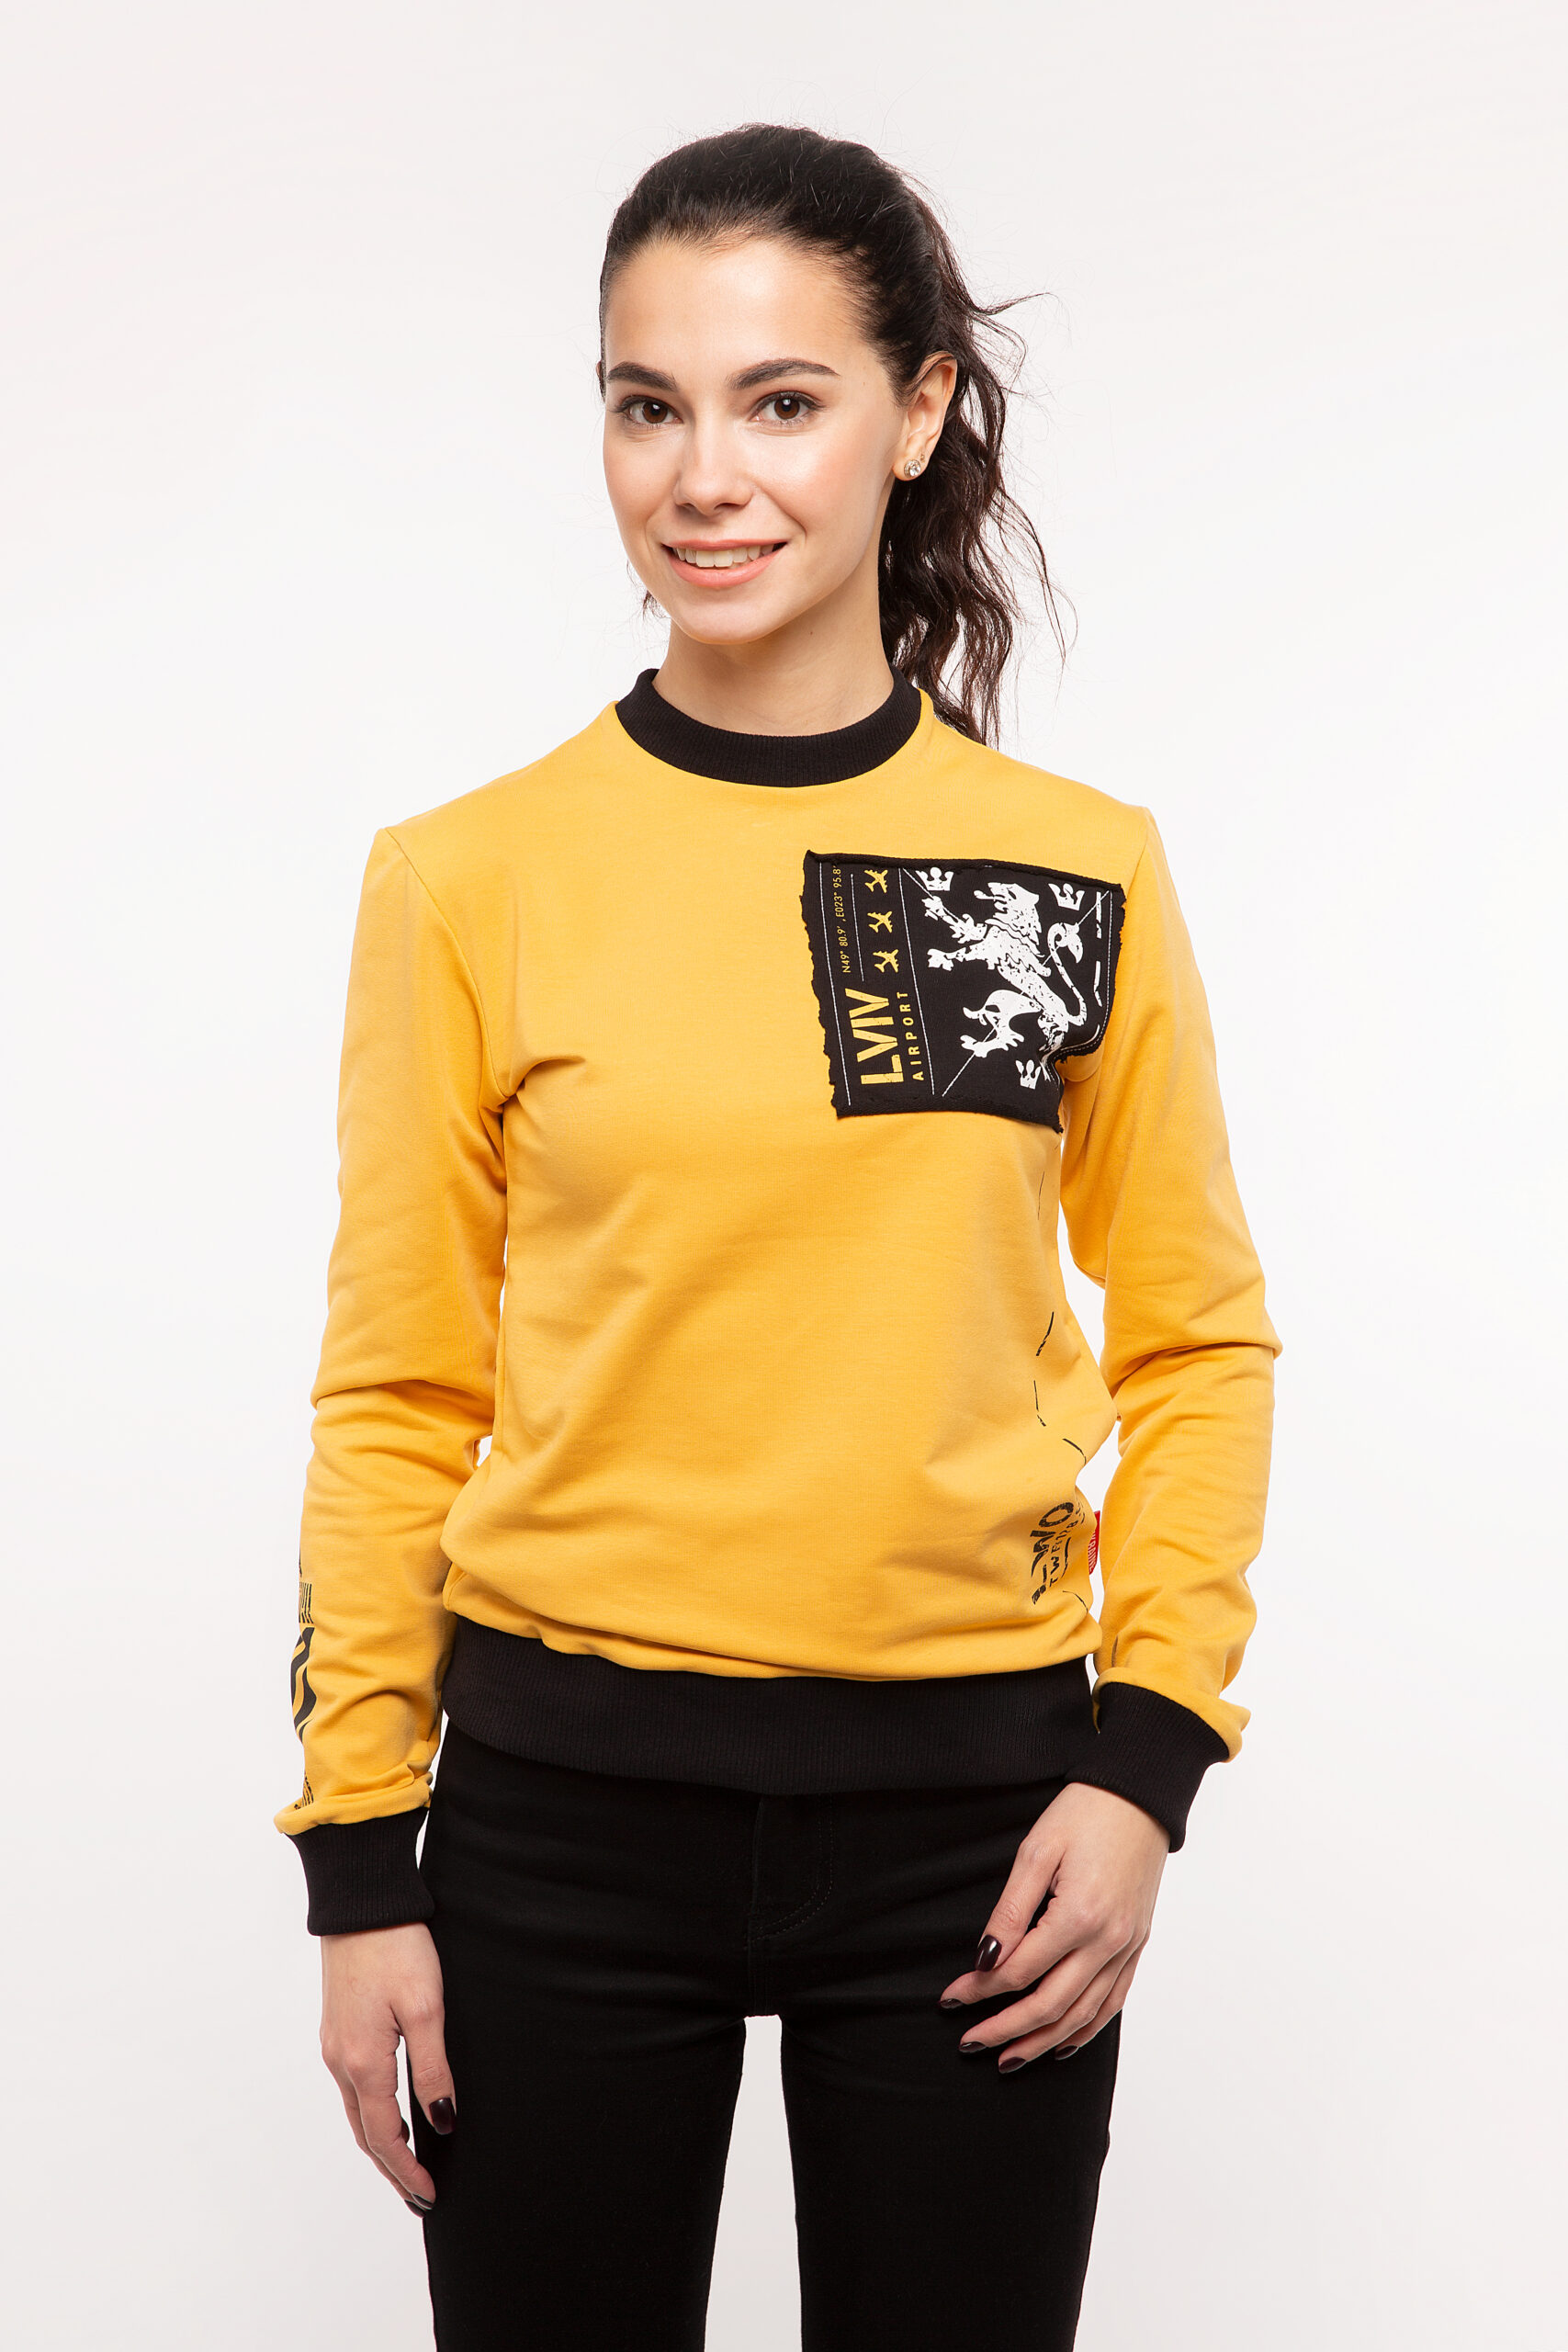 Women's Long Sleeve Have A Nice Fligh. Color yellow. Material: 97% cotton, 3% spandex.